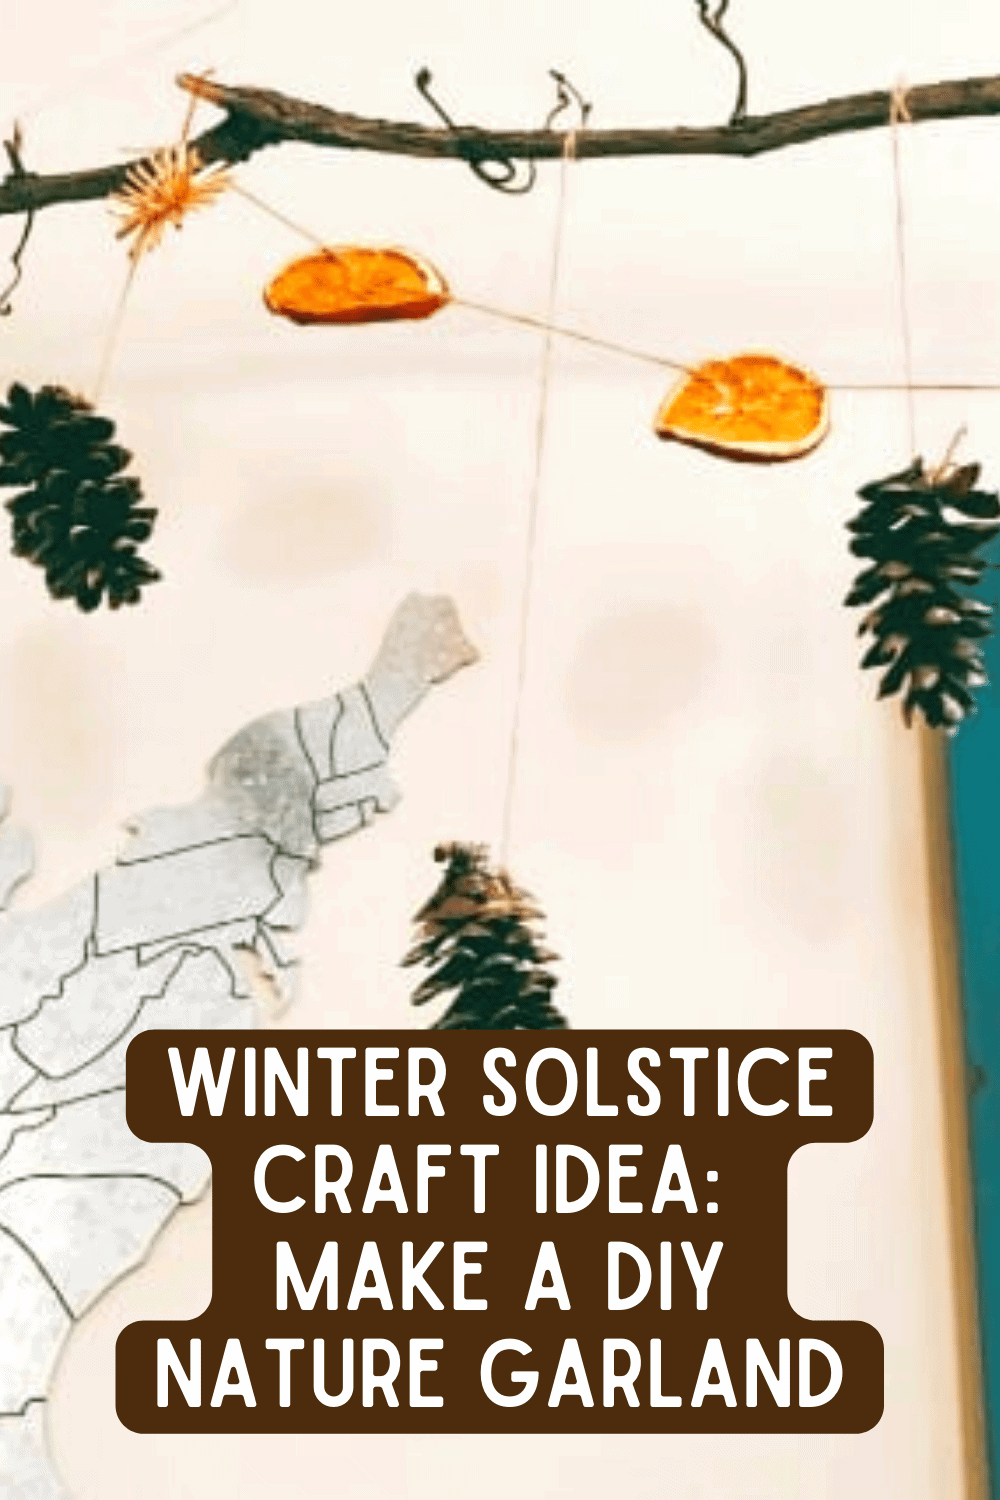 Winter Solstice Craft Projects Ideas - DIY Nature Garland